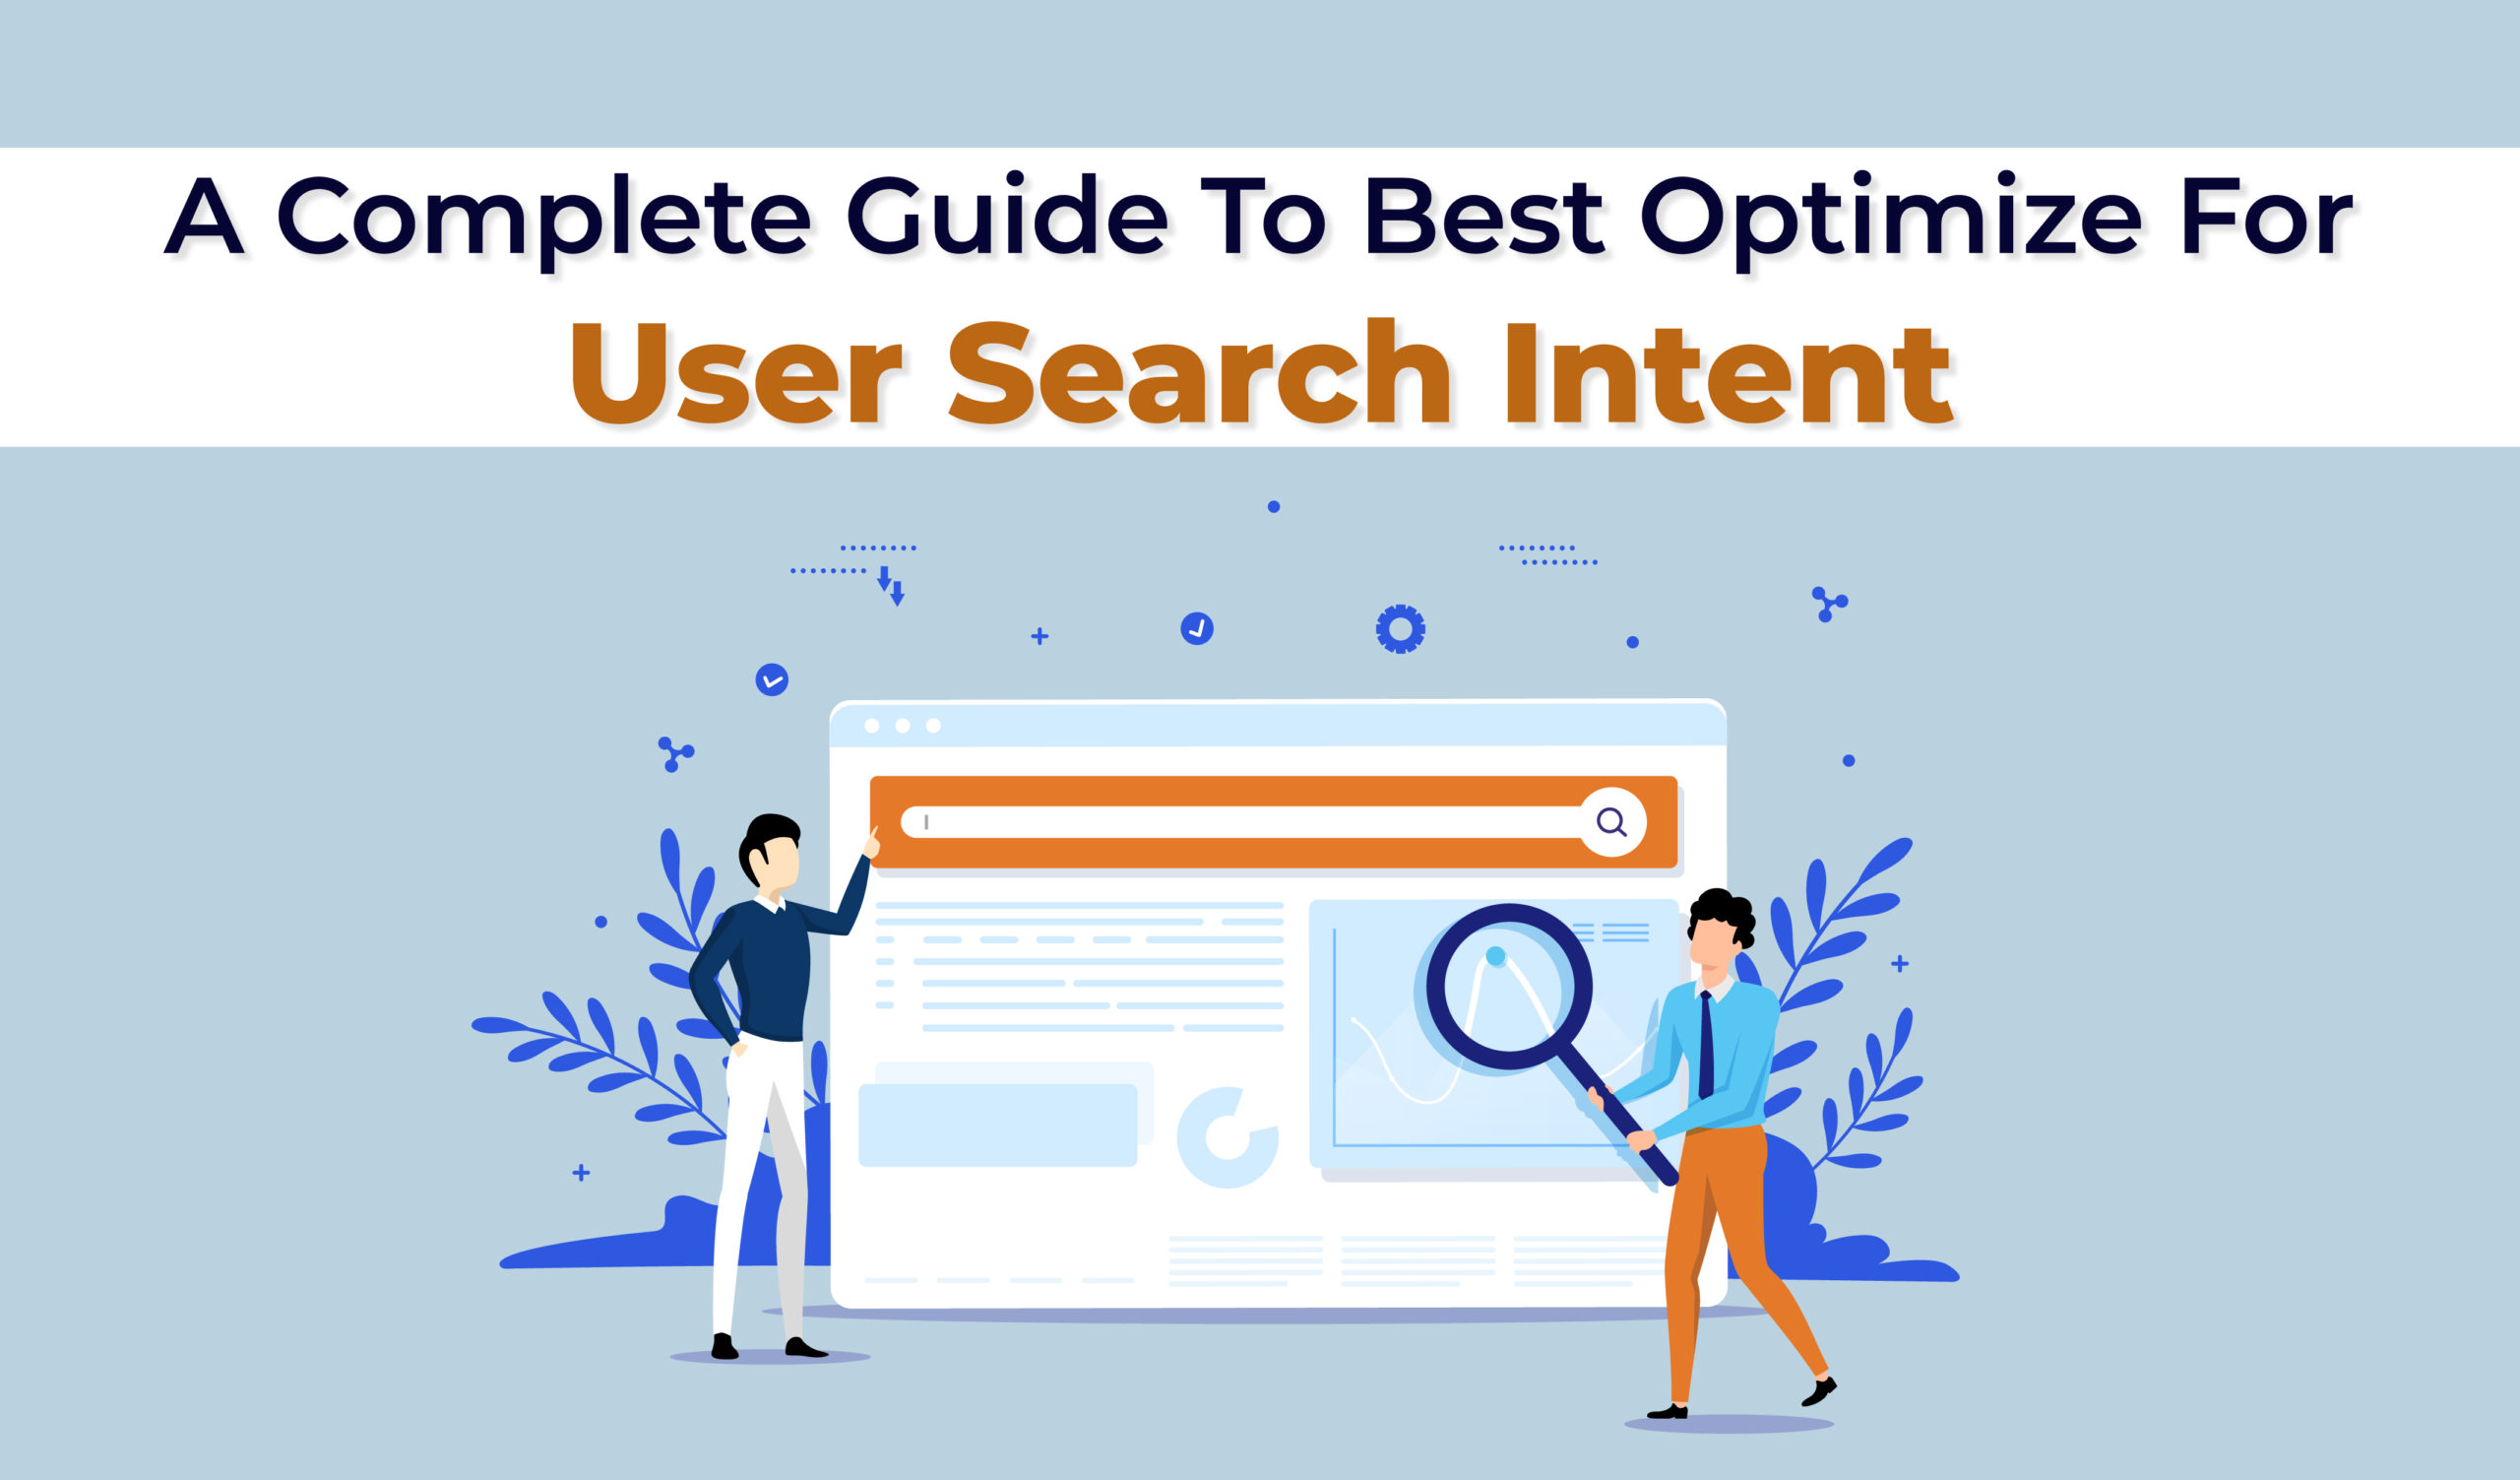 A Complete Guide To Best Optimize For User Search Intent